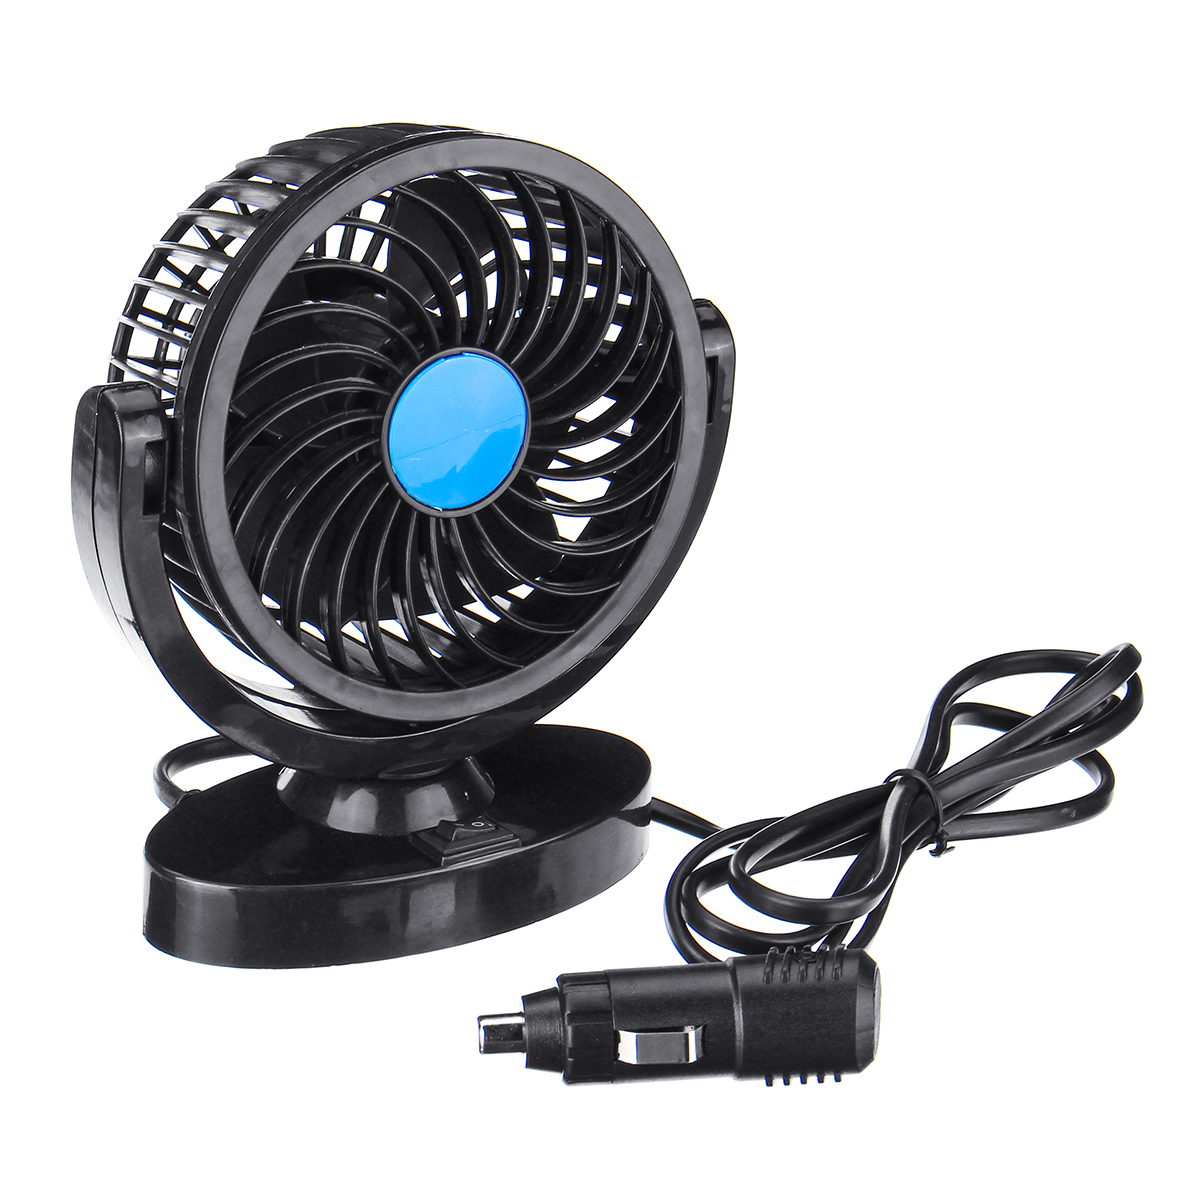 DC-12V24V-360deg-All-Round-Mini-Auto-Air-Cooling-Fan-Adjustable-Low-Noise-1466573-3